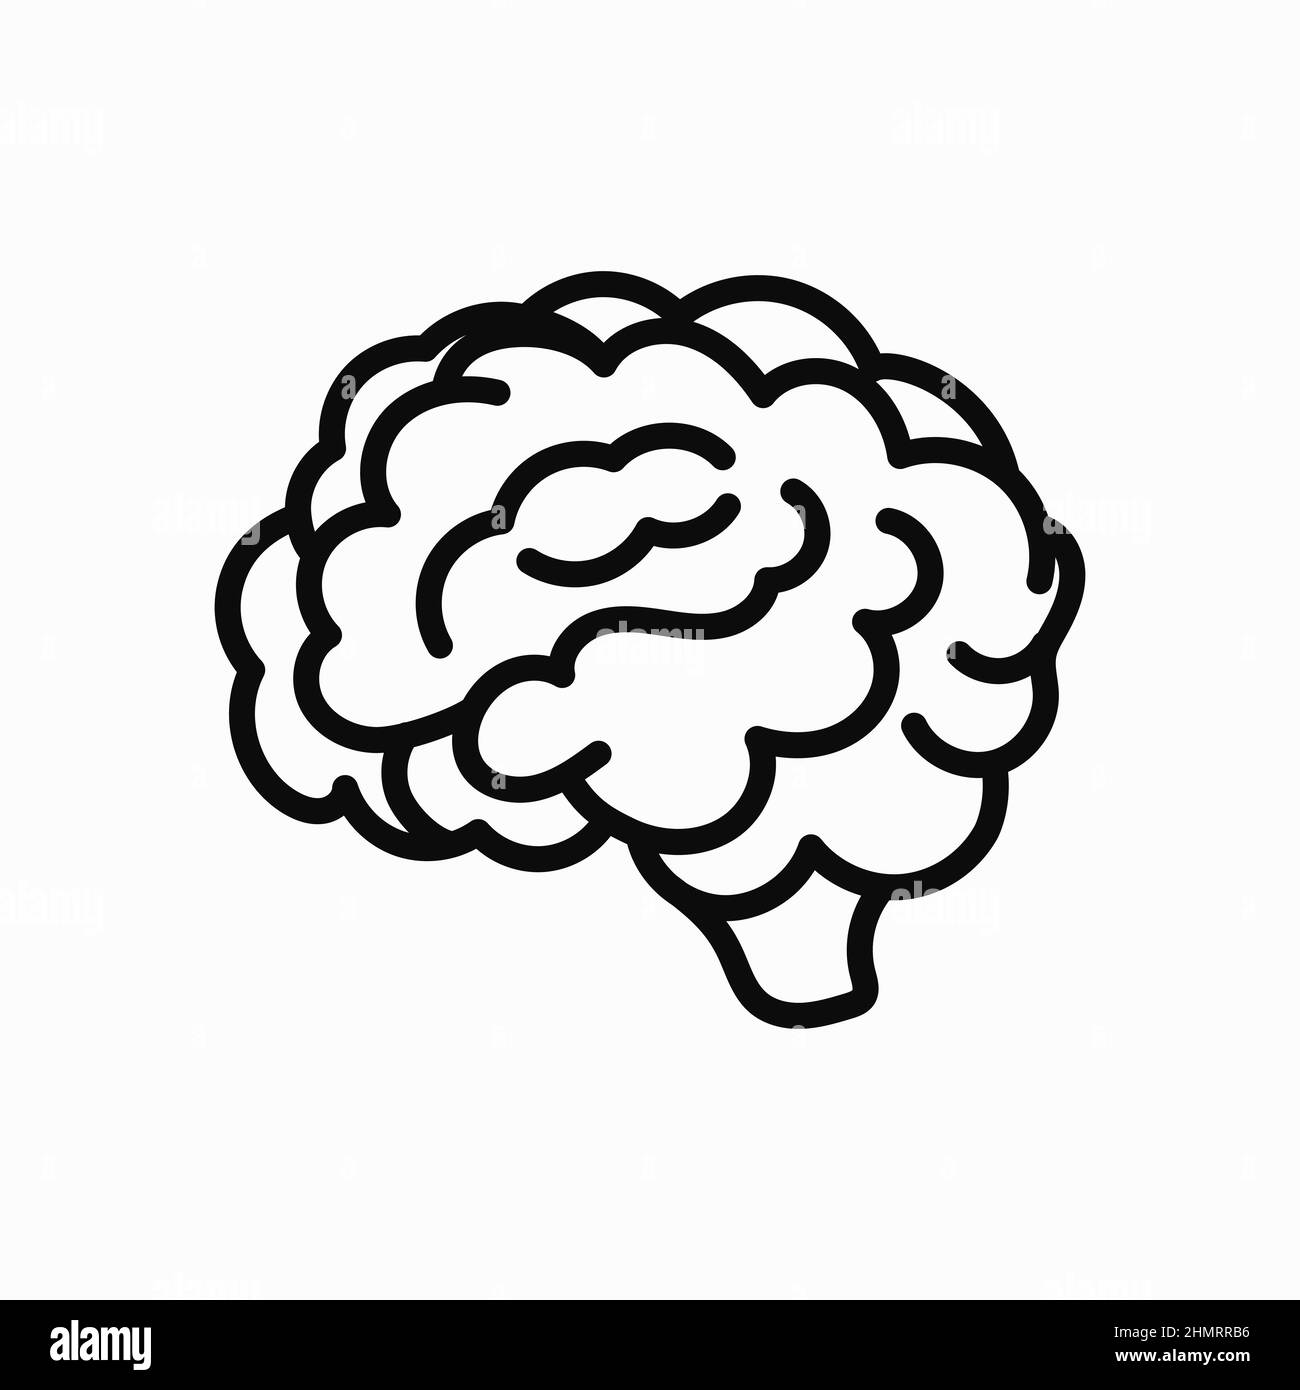 Illustration of the medical vector icon of the human brain isolated on a white background. high quality black style vector icons. Stock Vector